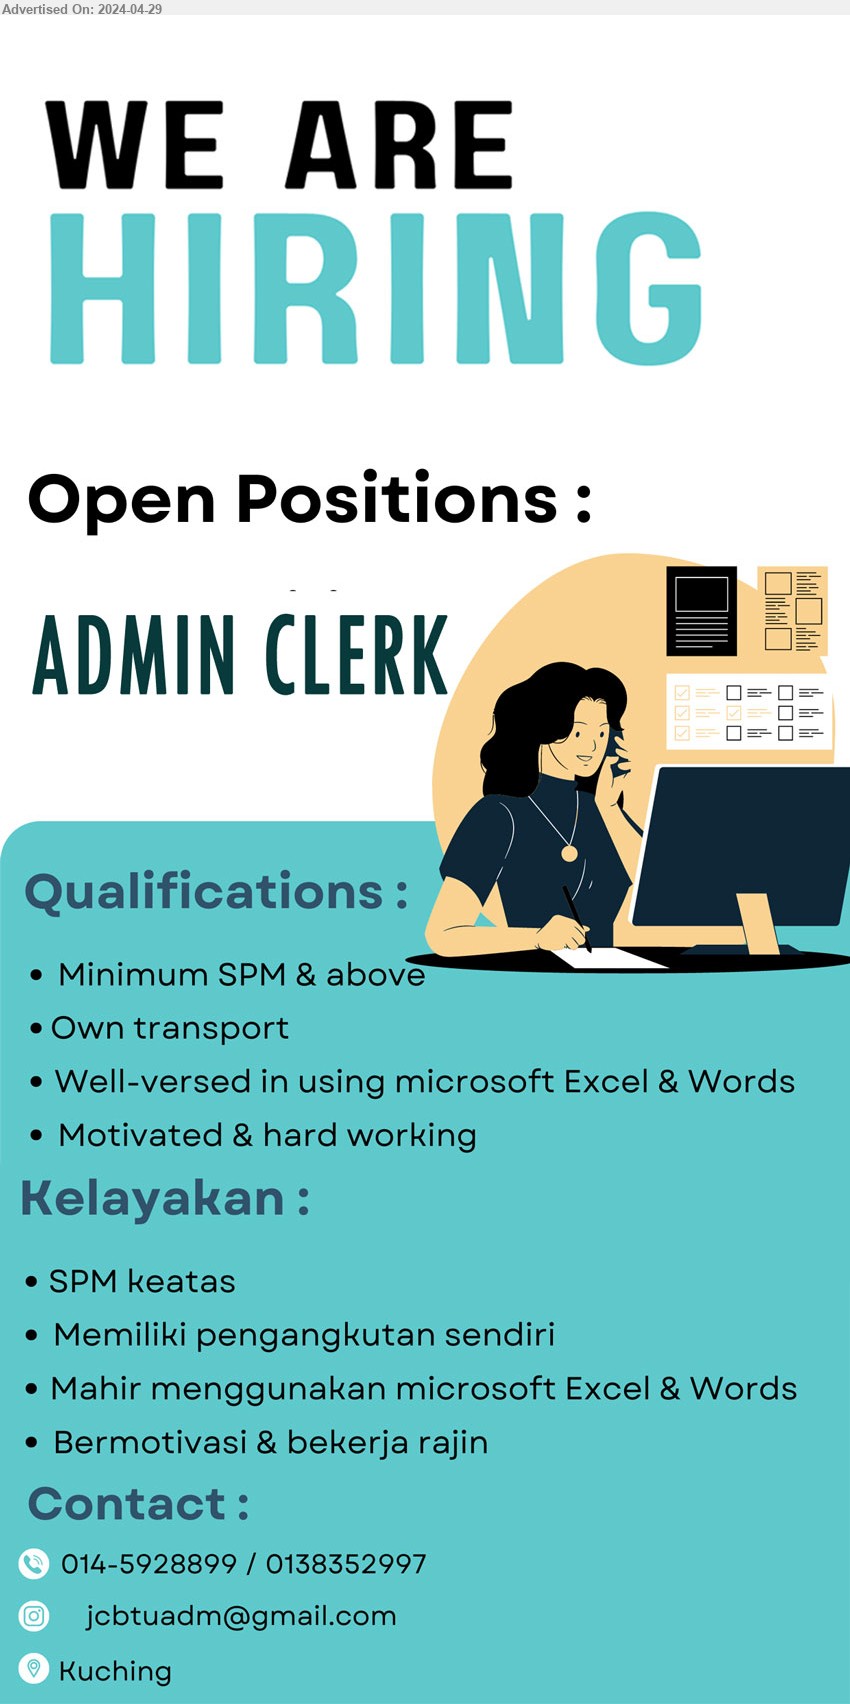 ADVERTISER - ADMIN CLERK (Kuching), SPM & above, well-versed in using MS Excel & Words,...
Call 014-5928899, 013-8352997 / Email resume to ...